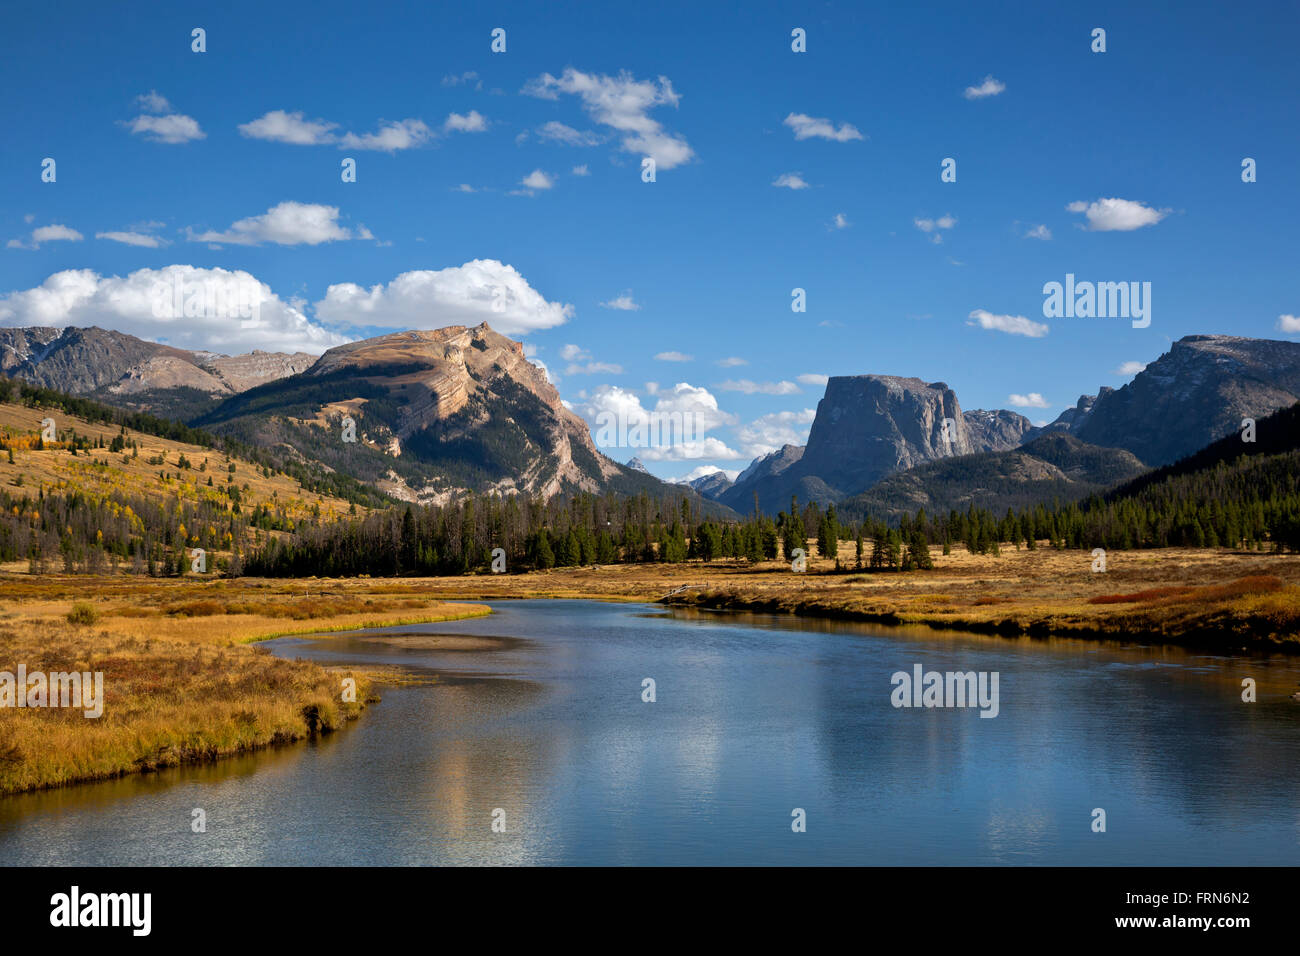 WY01375-00...WYOMING - Squaretop Mountain and the Green River in the Teton National Forest section of the Wind River Range. Stock Photo